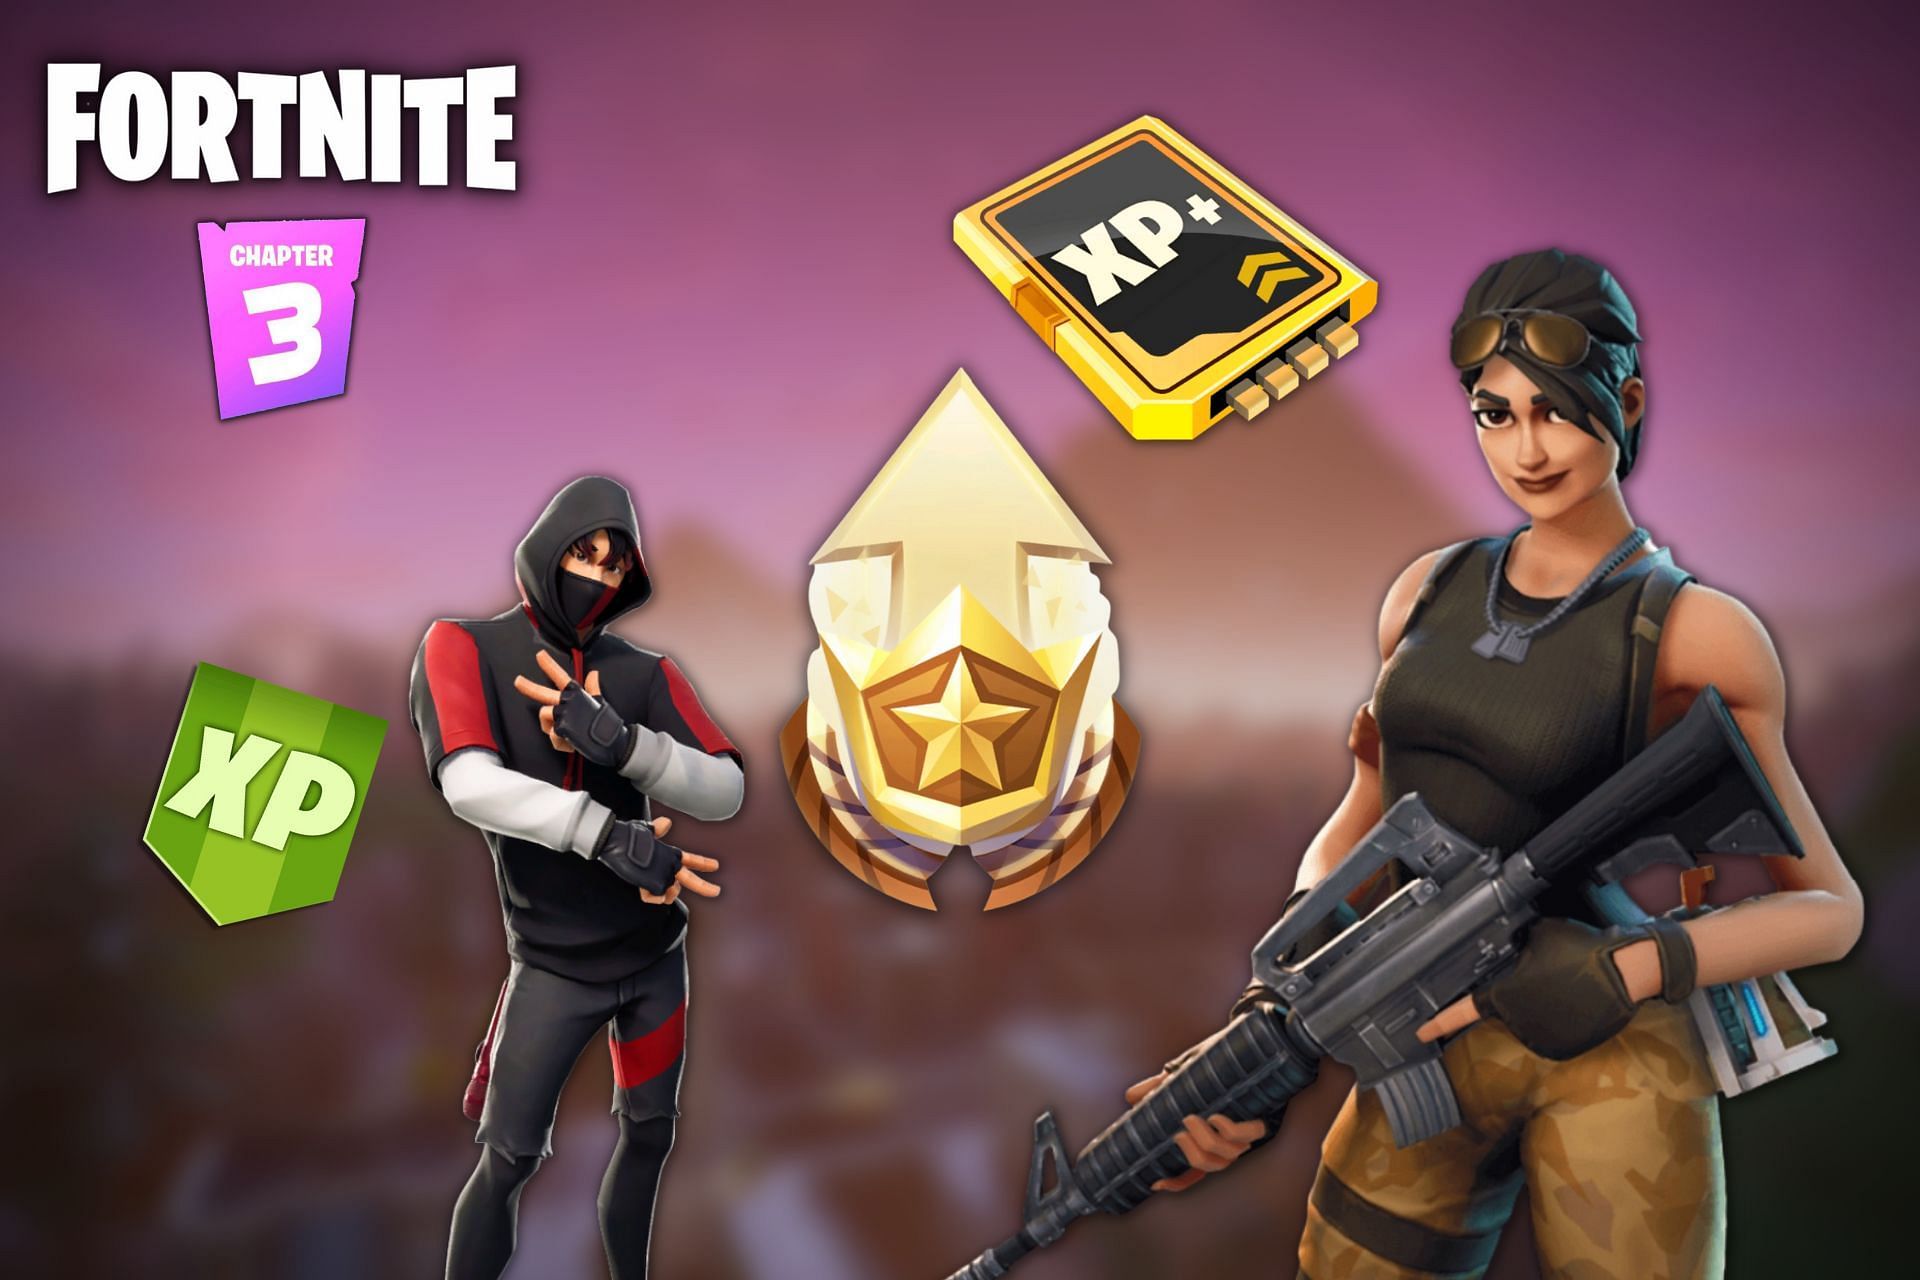 Fortnite Creative Mode is offering a ton of XP for players to acquire and unlock Battle Pass levels quickly in Chapter 3 Season 1 (Image via Sportskeeda)